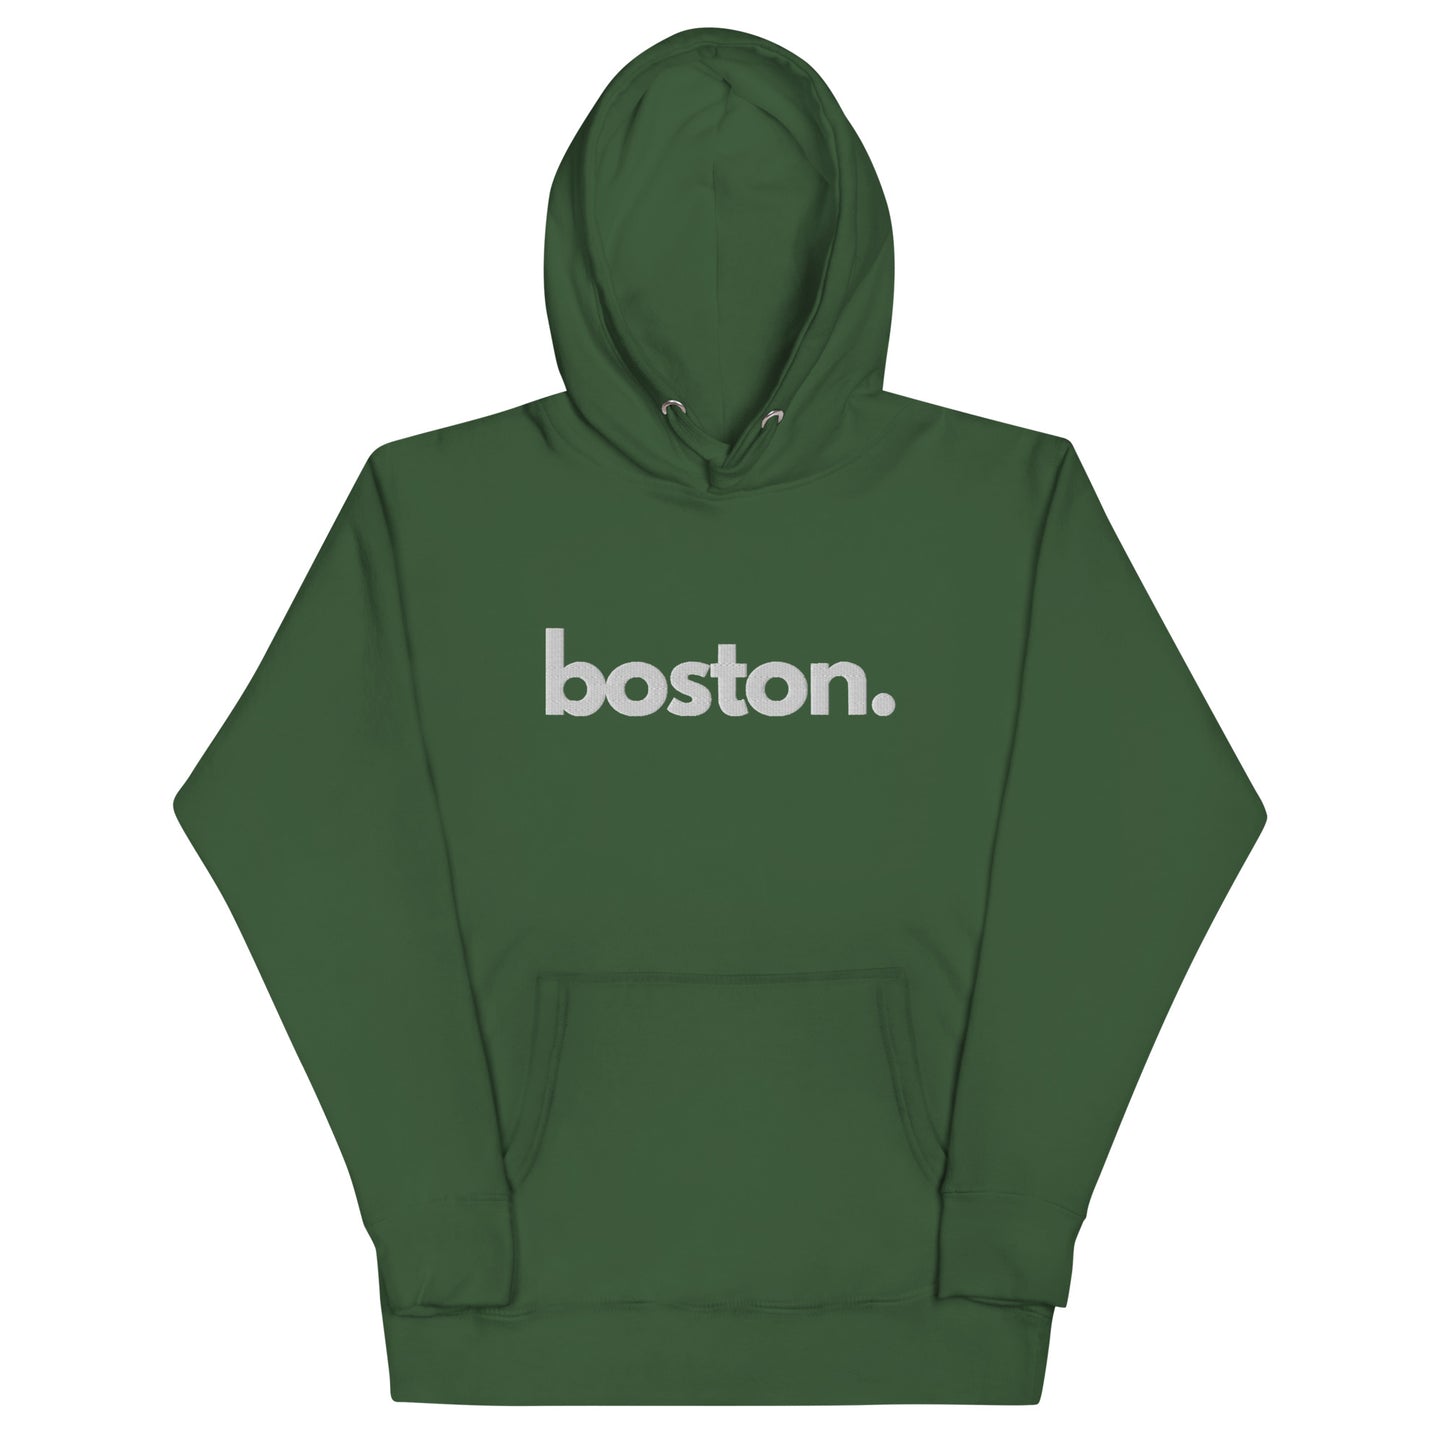 boston. Embroidered Hoodie